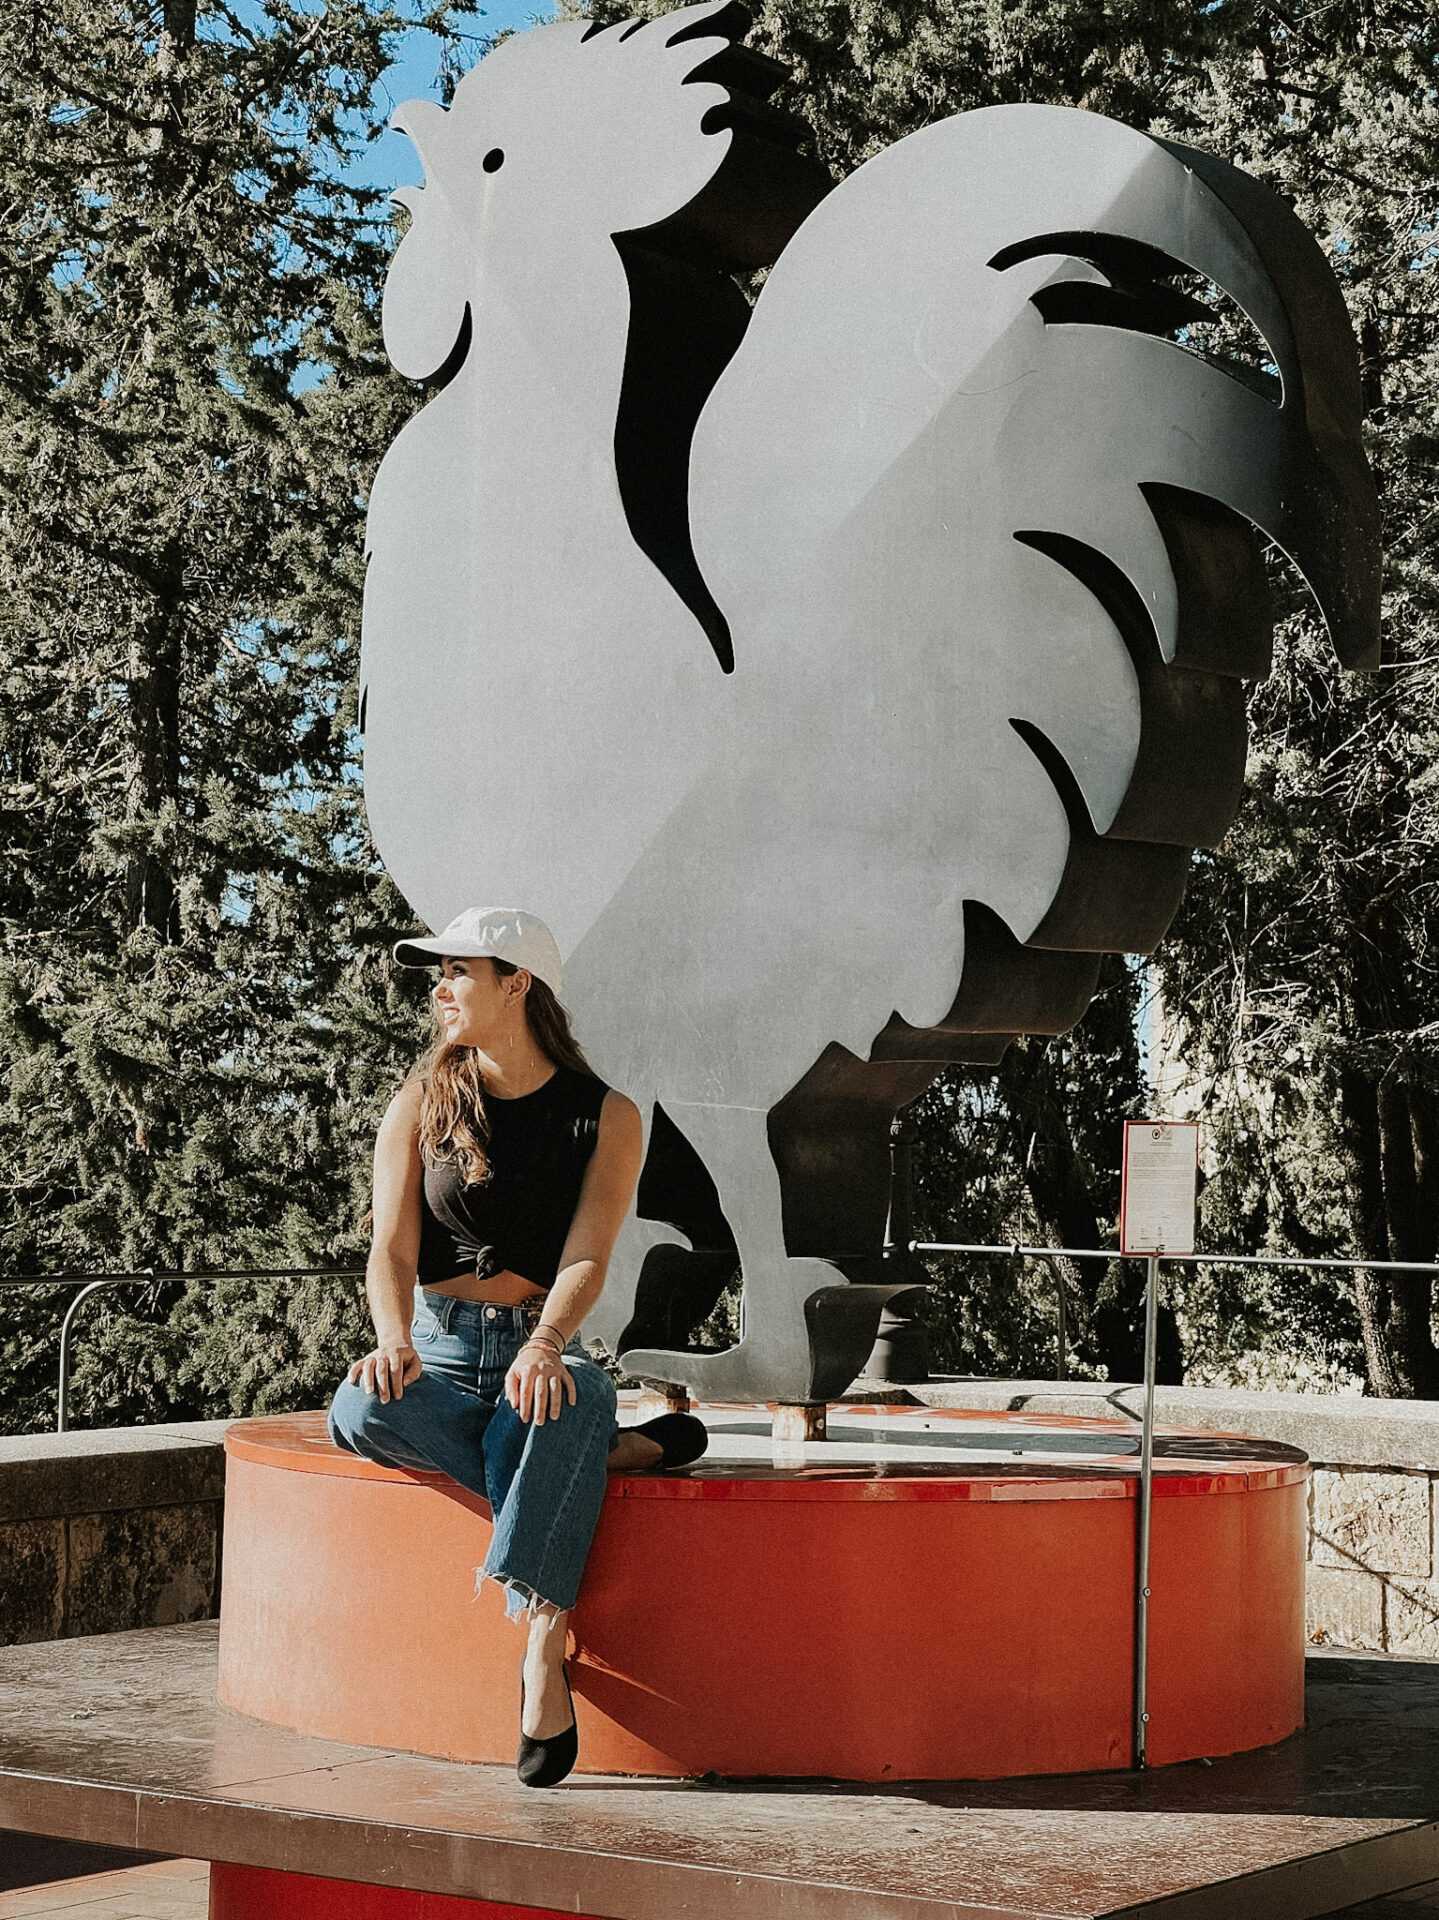 Paige in front of Chianti Classico rooster